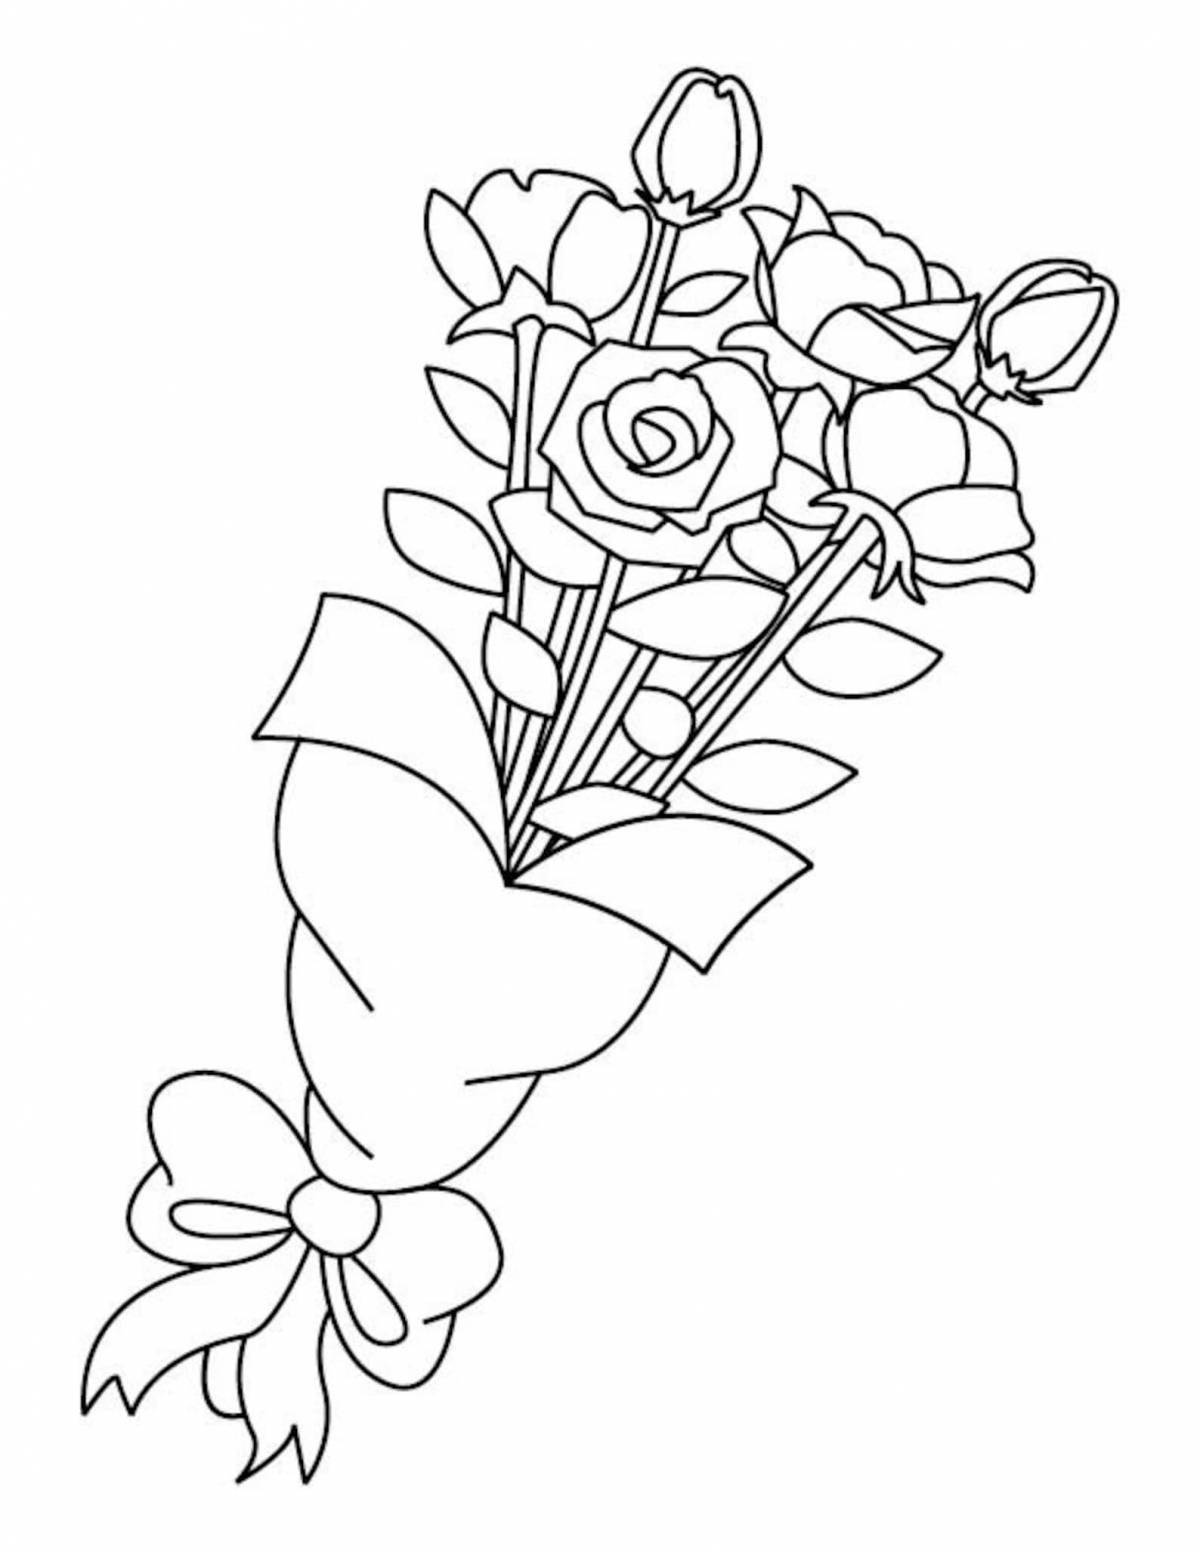 Coloring page inviting bouquet of roses